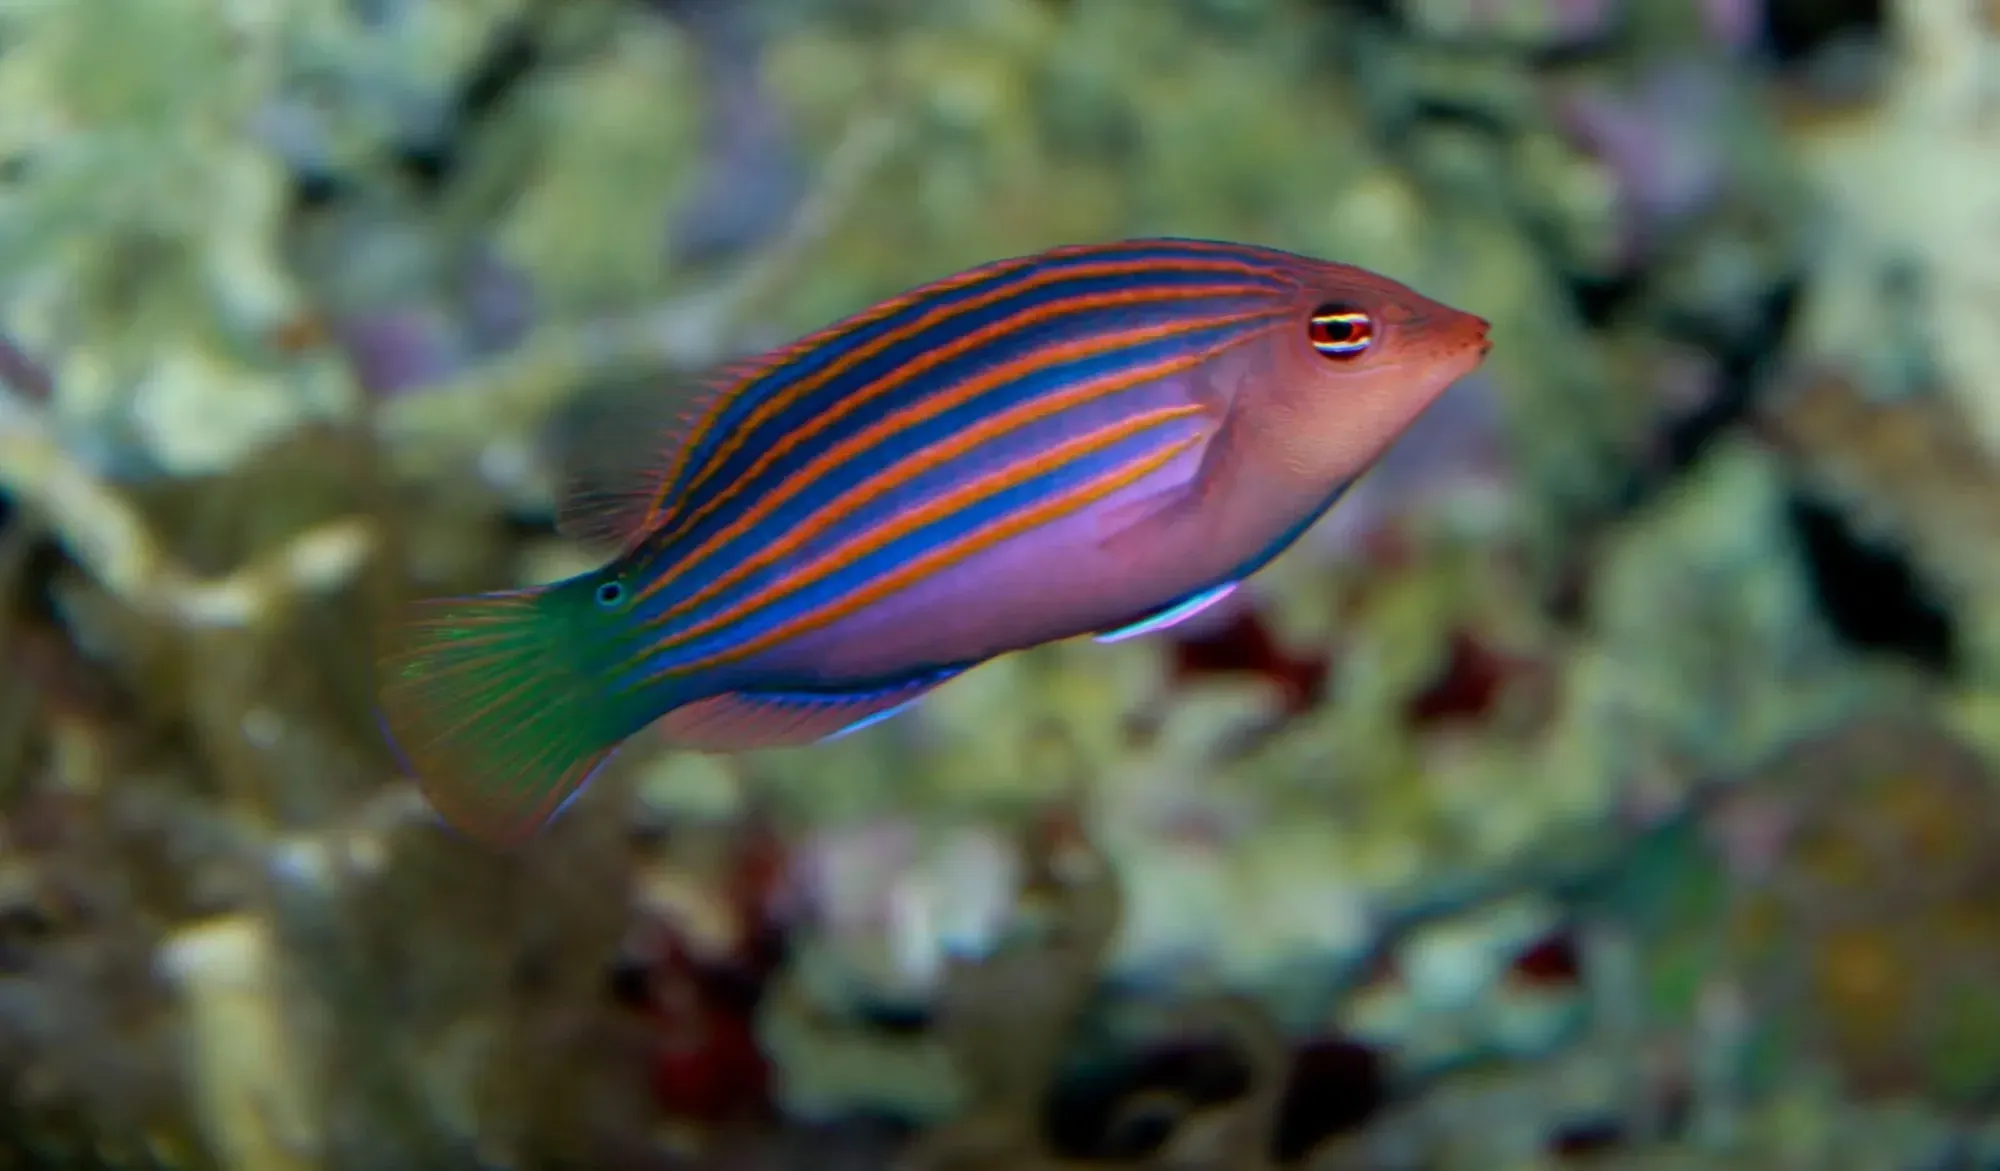 Eight-lined wrasse considered to be reef safe.